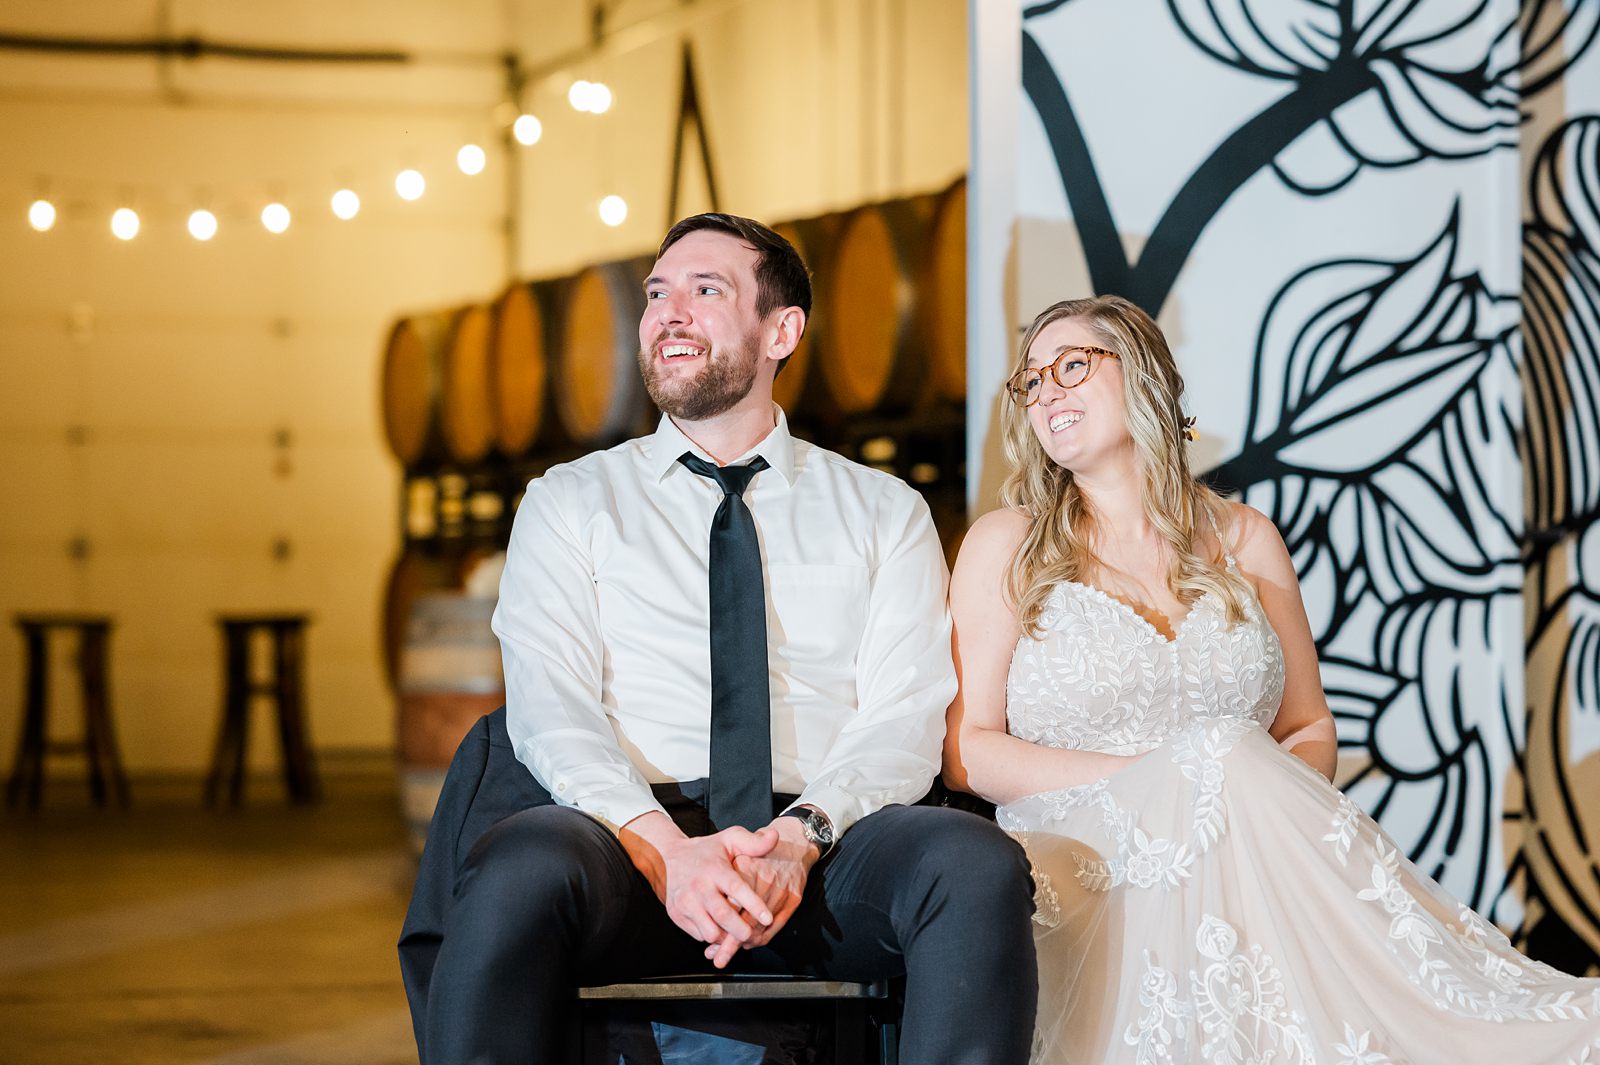 Bride and Groom Reactions During Toasts at Triple Crossing Beer Wedding Reception